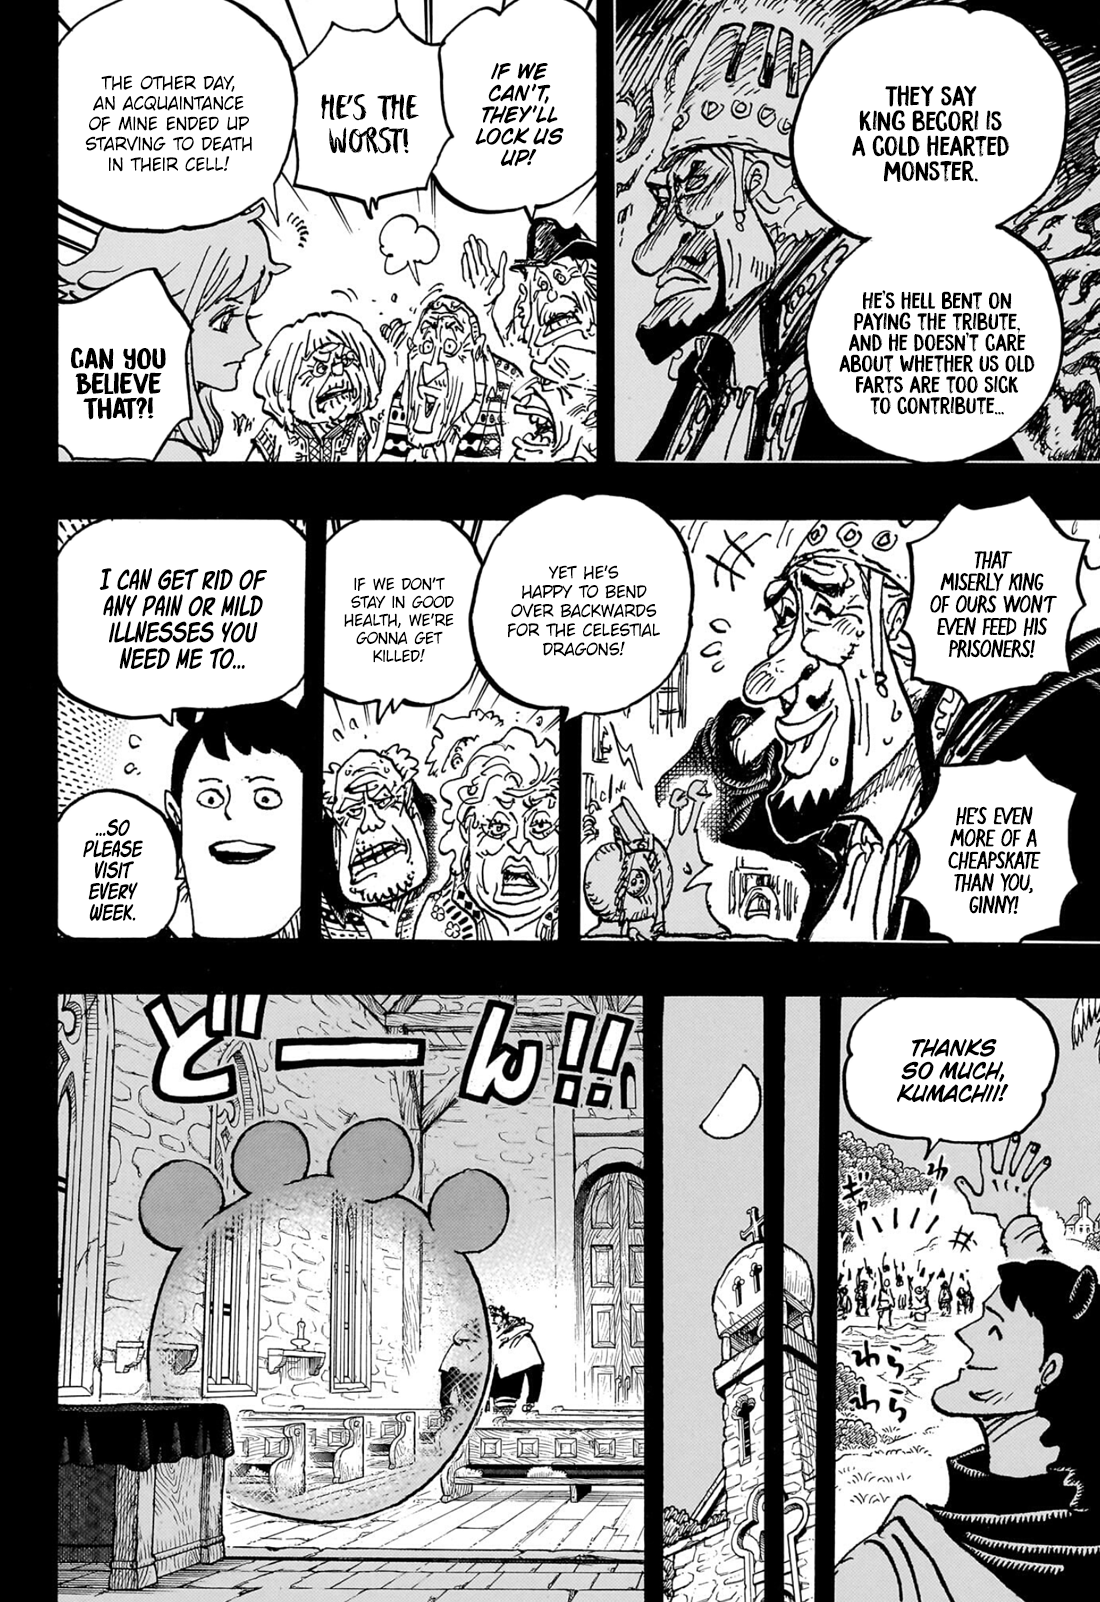 One Piece: Chapter 1062 - Theories and Discussion : r/OnePiece